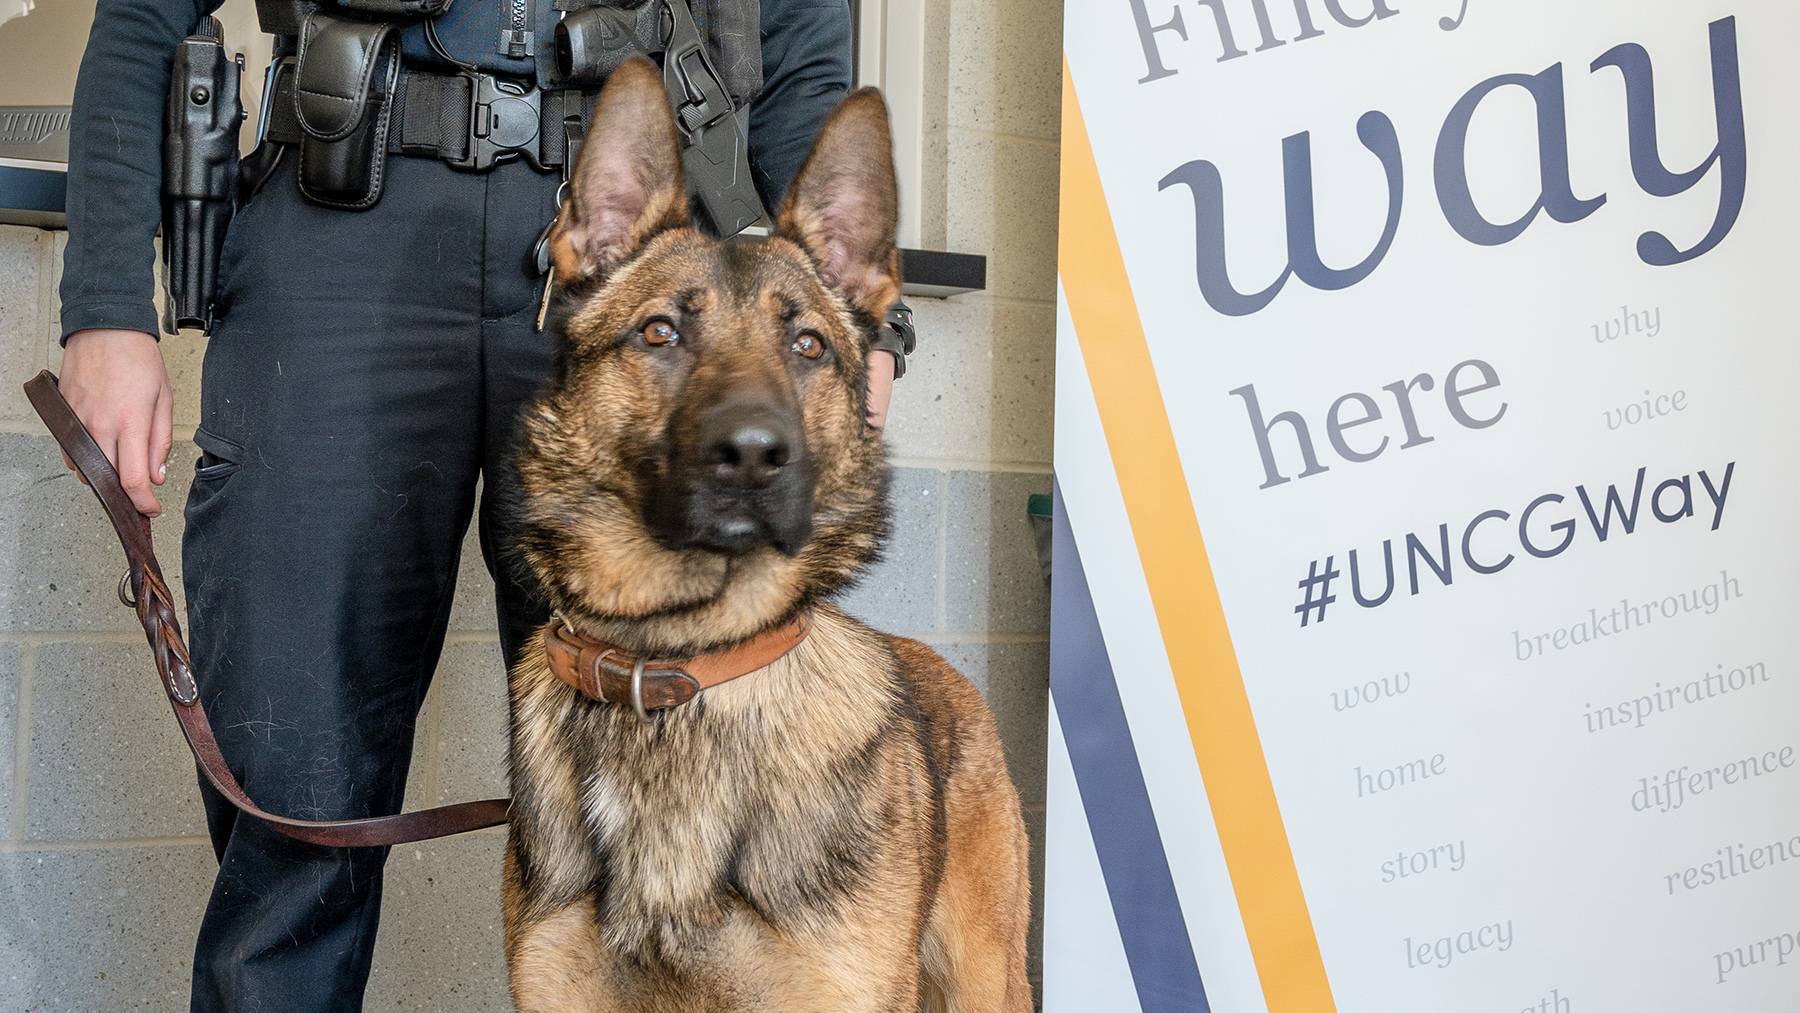 A UNCG police officer and her K-9 partner pose for a picture.